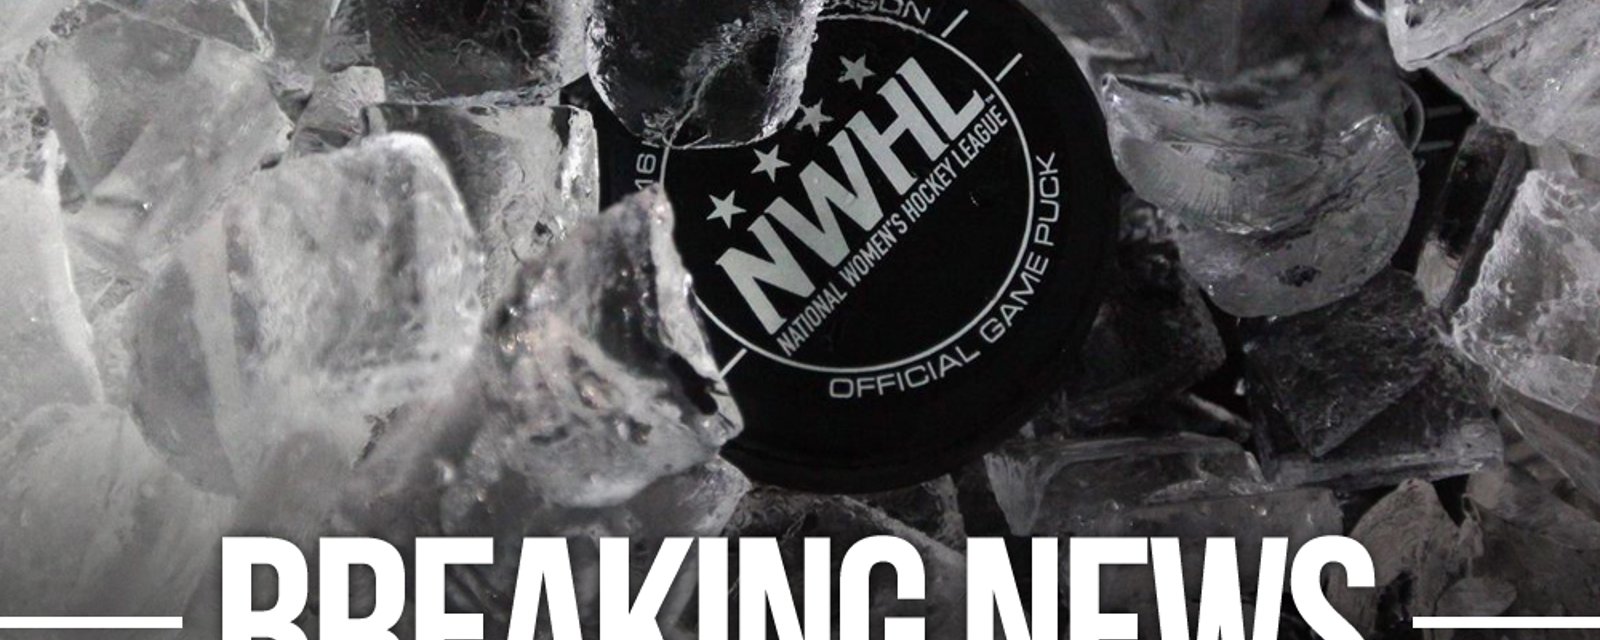 NWHL season is officially suspended